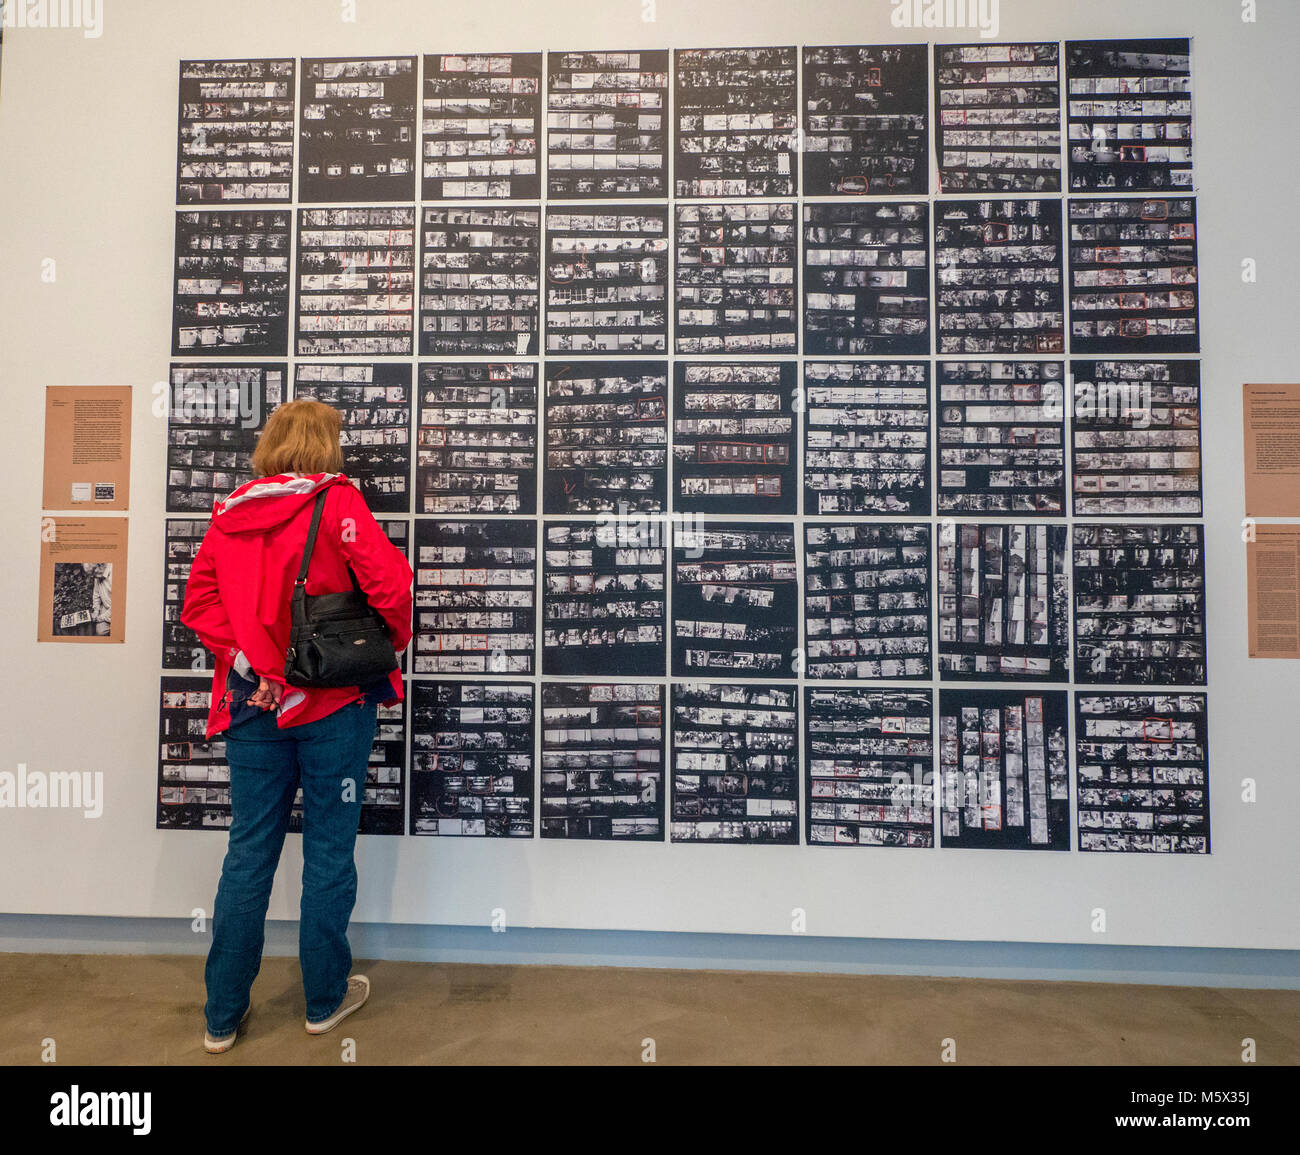 Portland, Oregon, USA. 26 FEB, 2018. Gallery goers view the enlarged contact sheets from photographer Robert Frank’s groundbreaking book 'The Americans' at Blue Sky Gallery in Portland, Oregon, USA. The work later was destroyed in a “Destruction Dance” performance defacing the photographs with ink and mutilation with scissors, knives and even ice skates  at the end of it’s run. The destruction was Frank's protest regarding today's greed in the global art market. Credit: Ken Hawkins/Alamy Live News Stock Photo